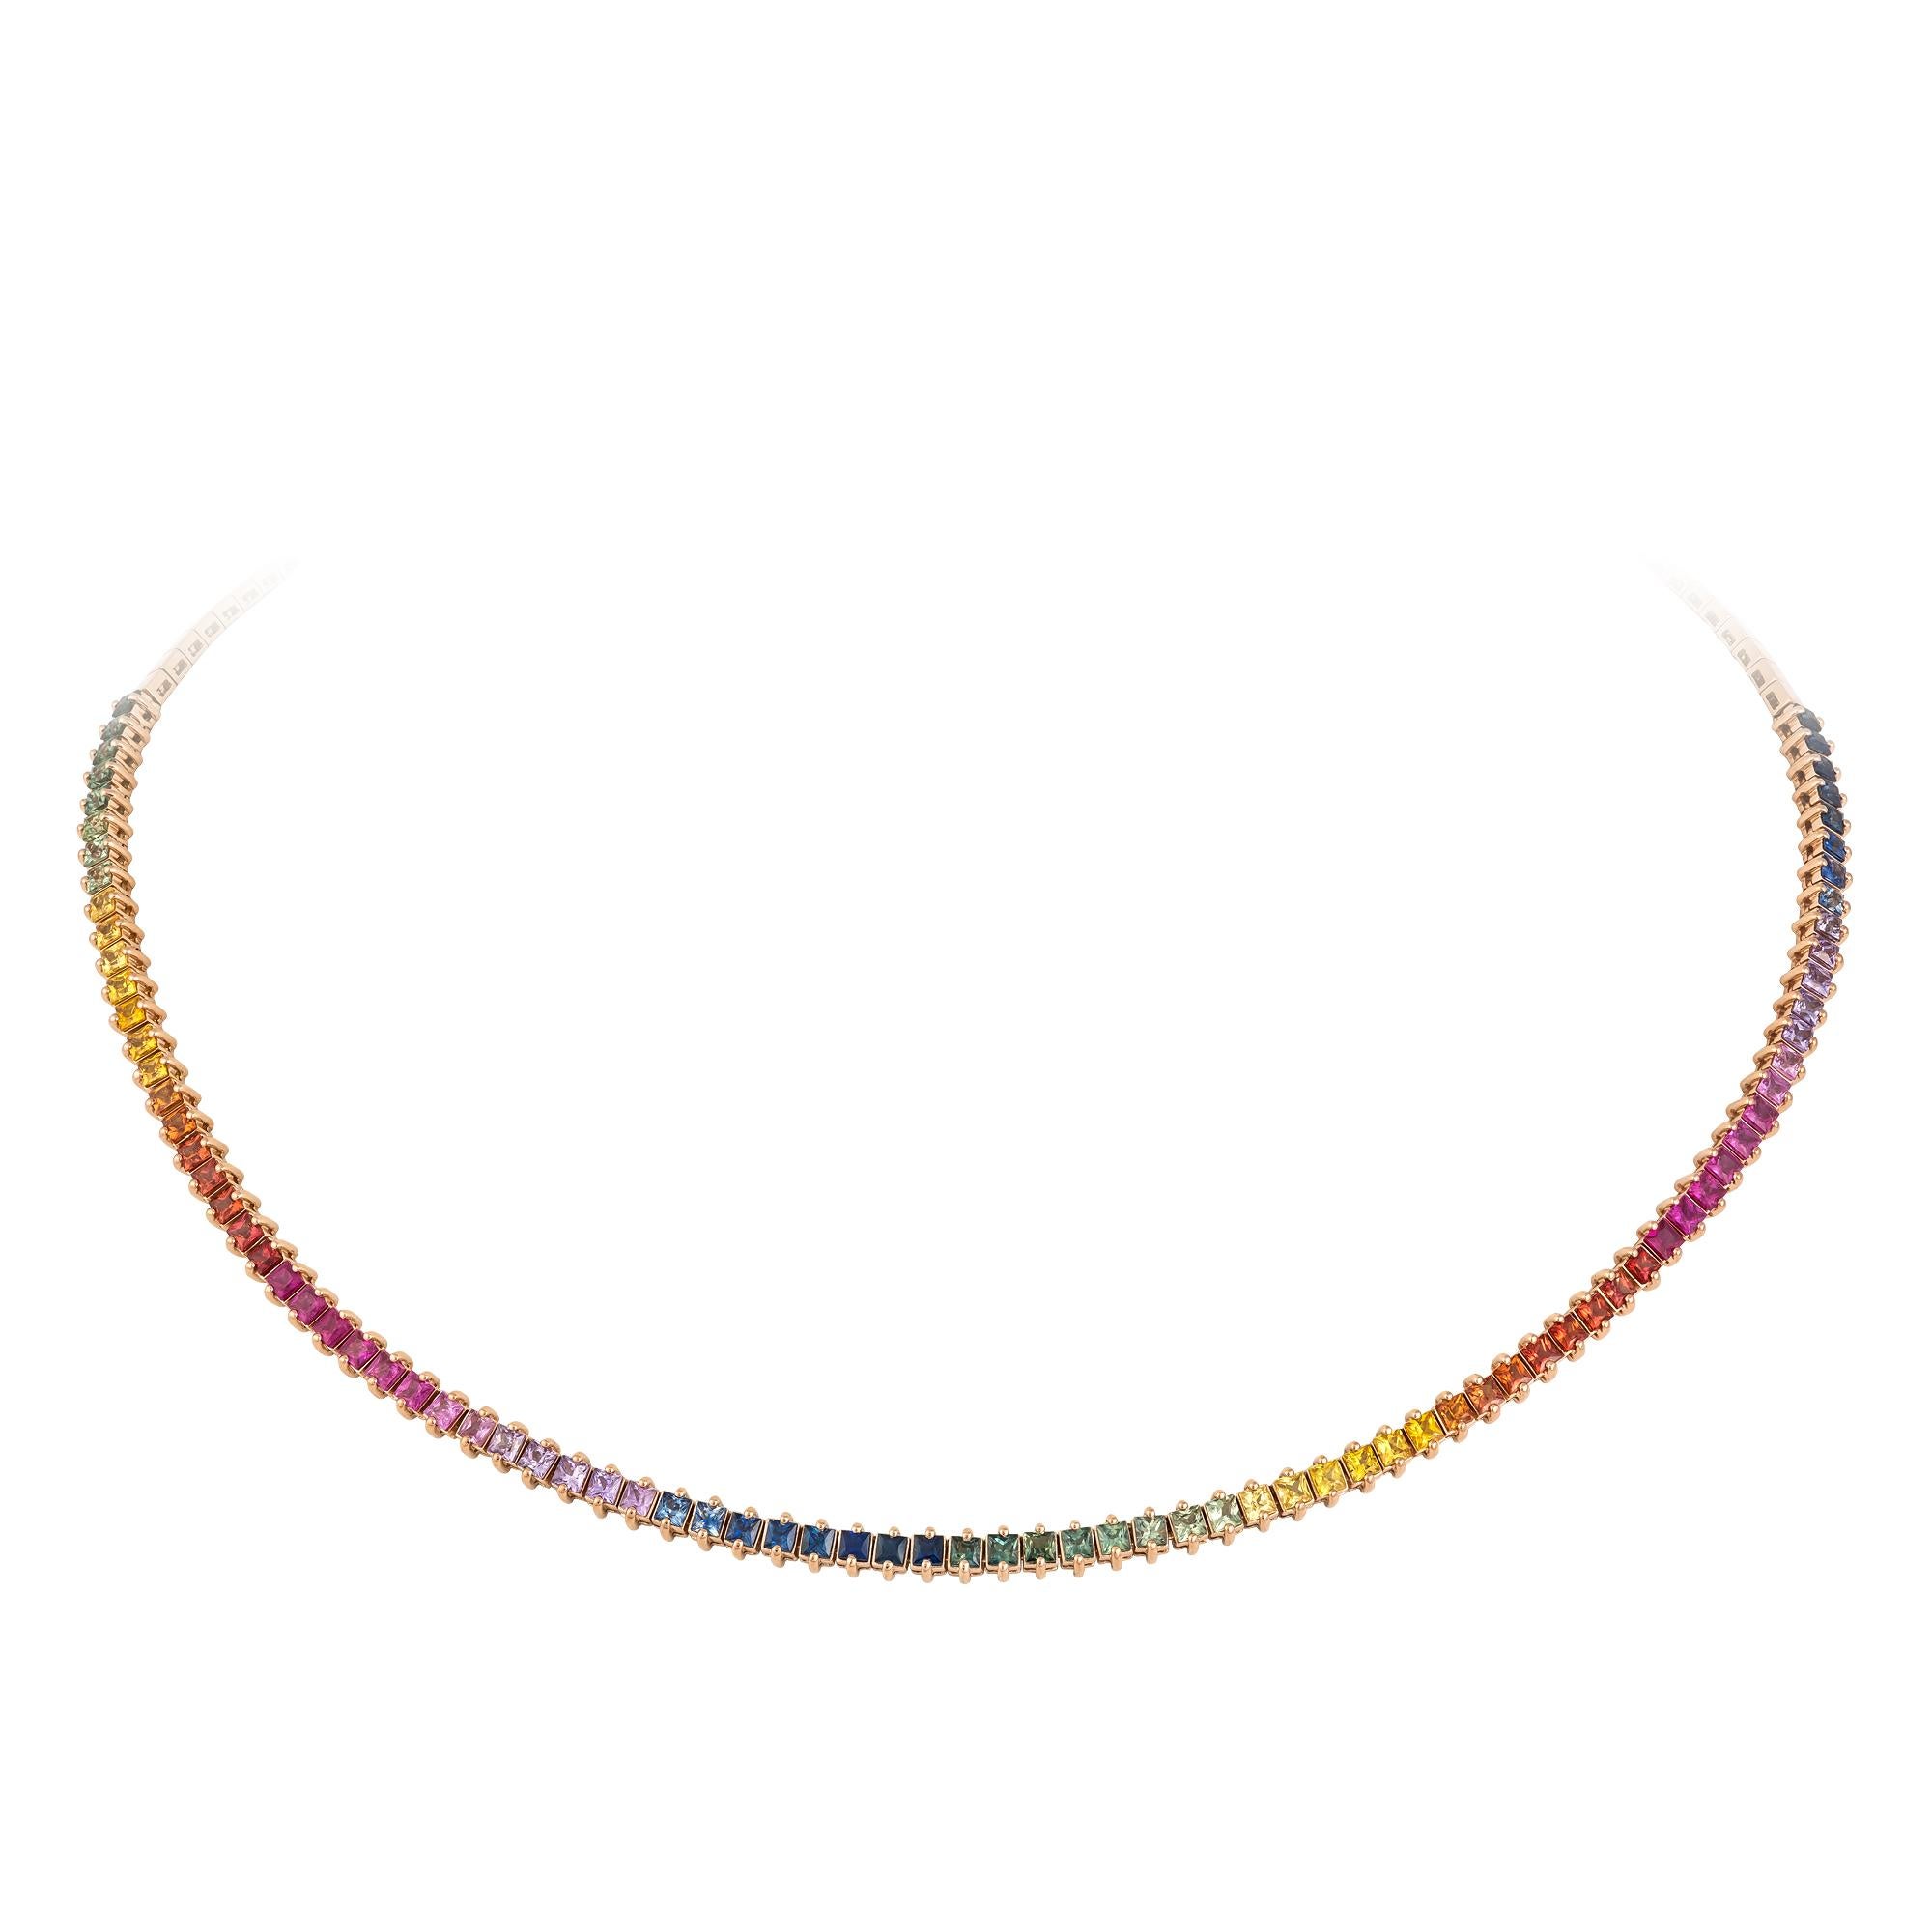 NECKLACE 18K Rose Gold 
Multi Sapphire 10.42 Cts/86 Pcs

With a heritage of ancient fine Swiss jewelry traditions, NATKINA is a Geneva based jewellery brand, which creates modern jewellery masterpieces suitable for every day life.
It is our honour